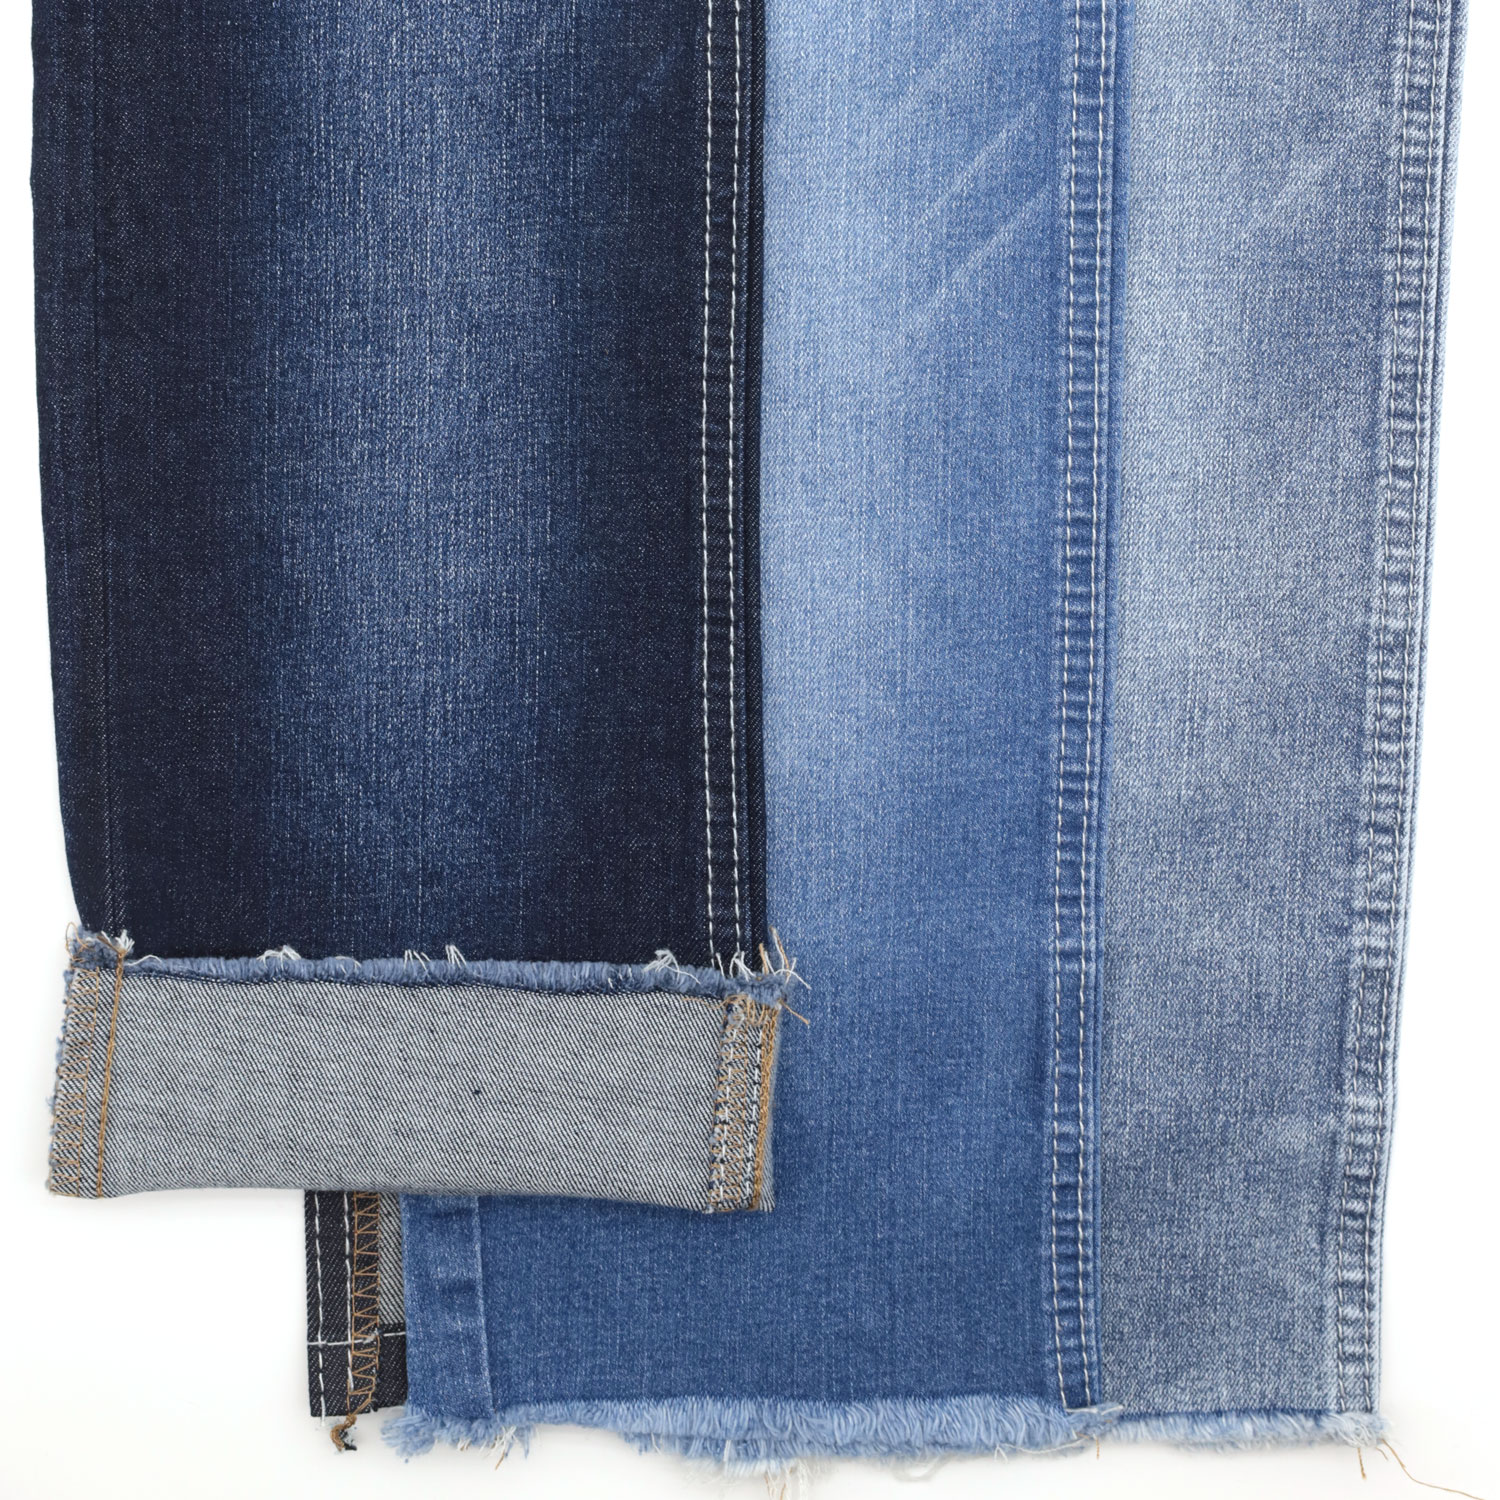 How to Care for Your New China Denim Fabric 1